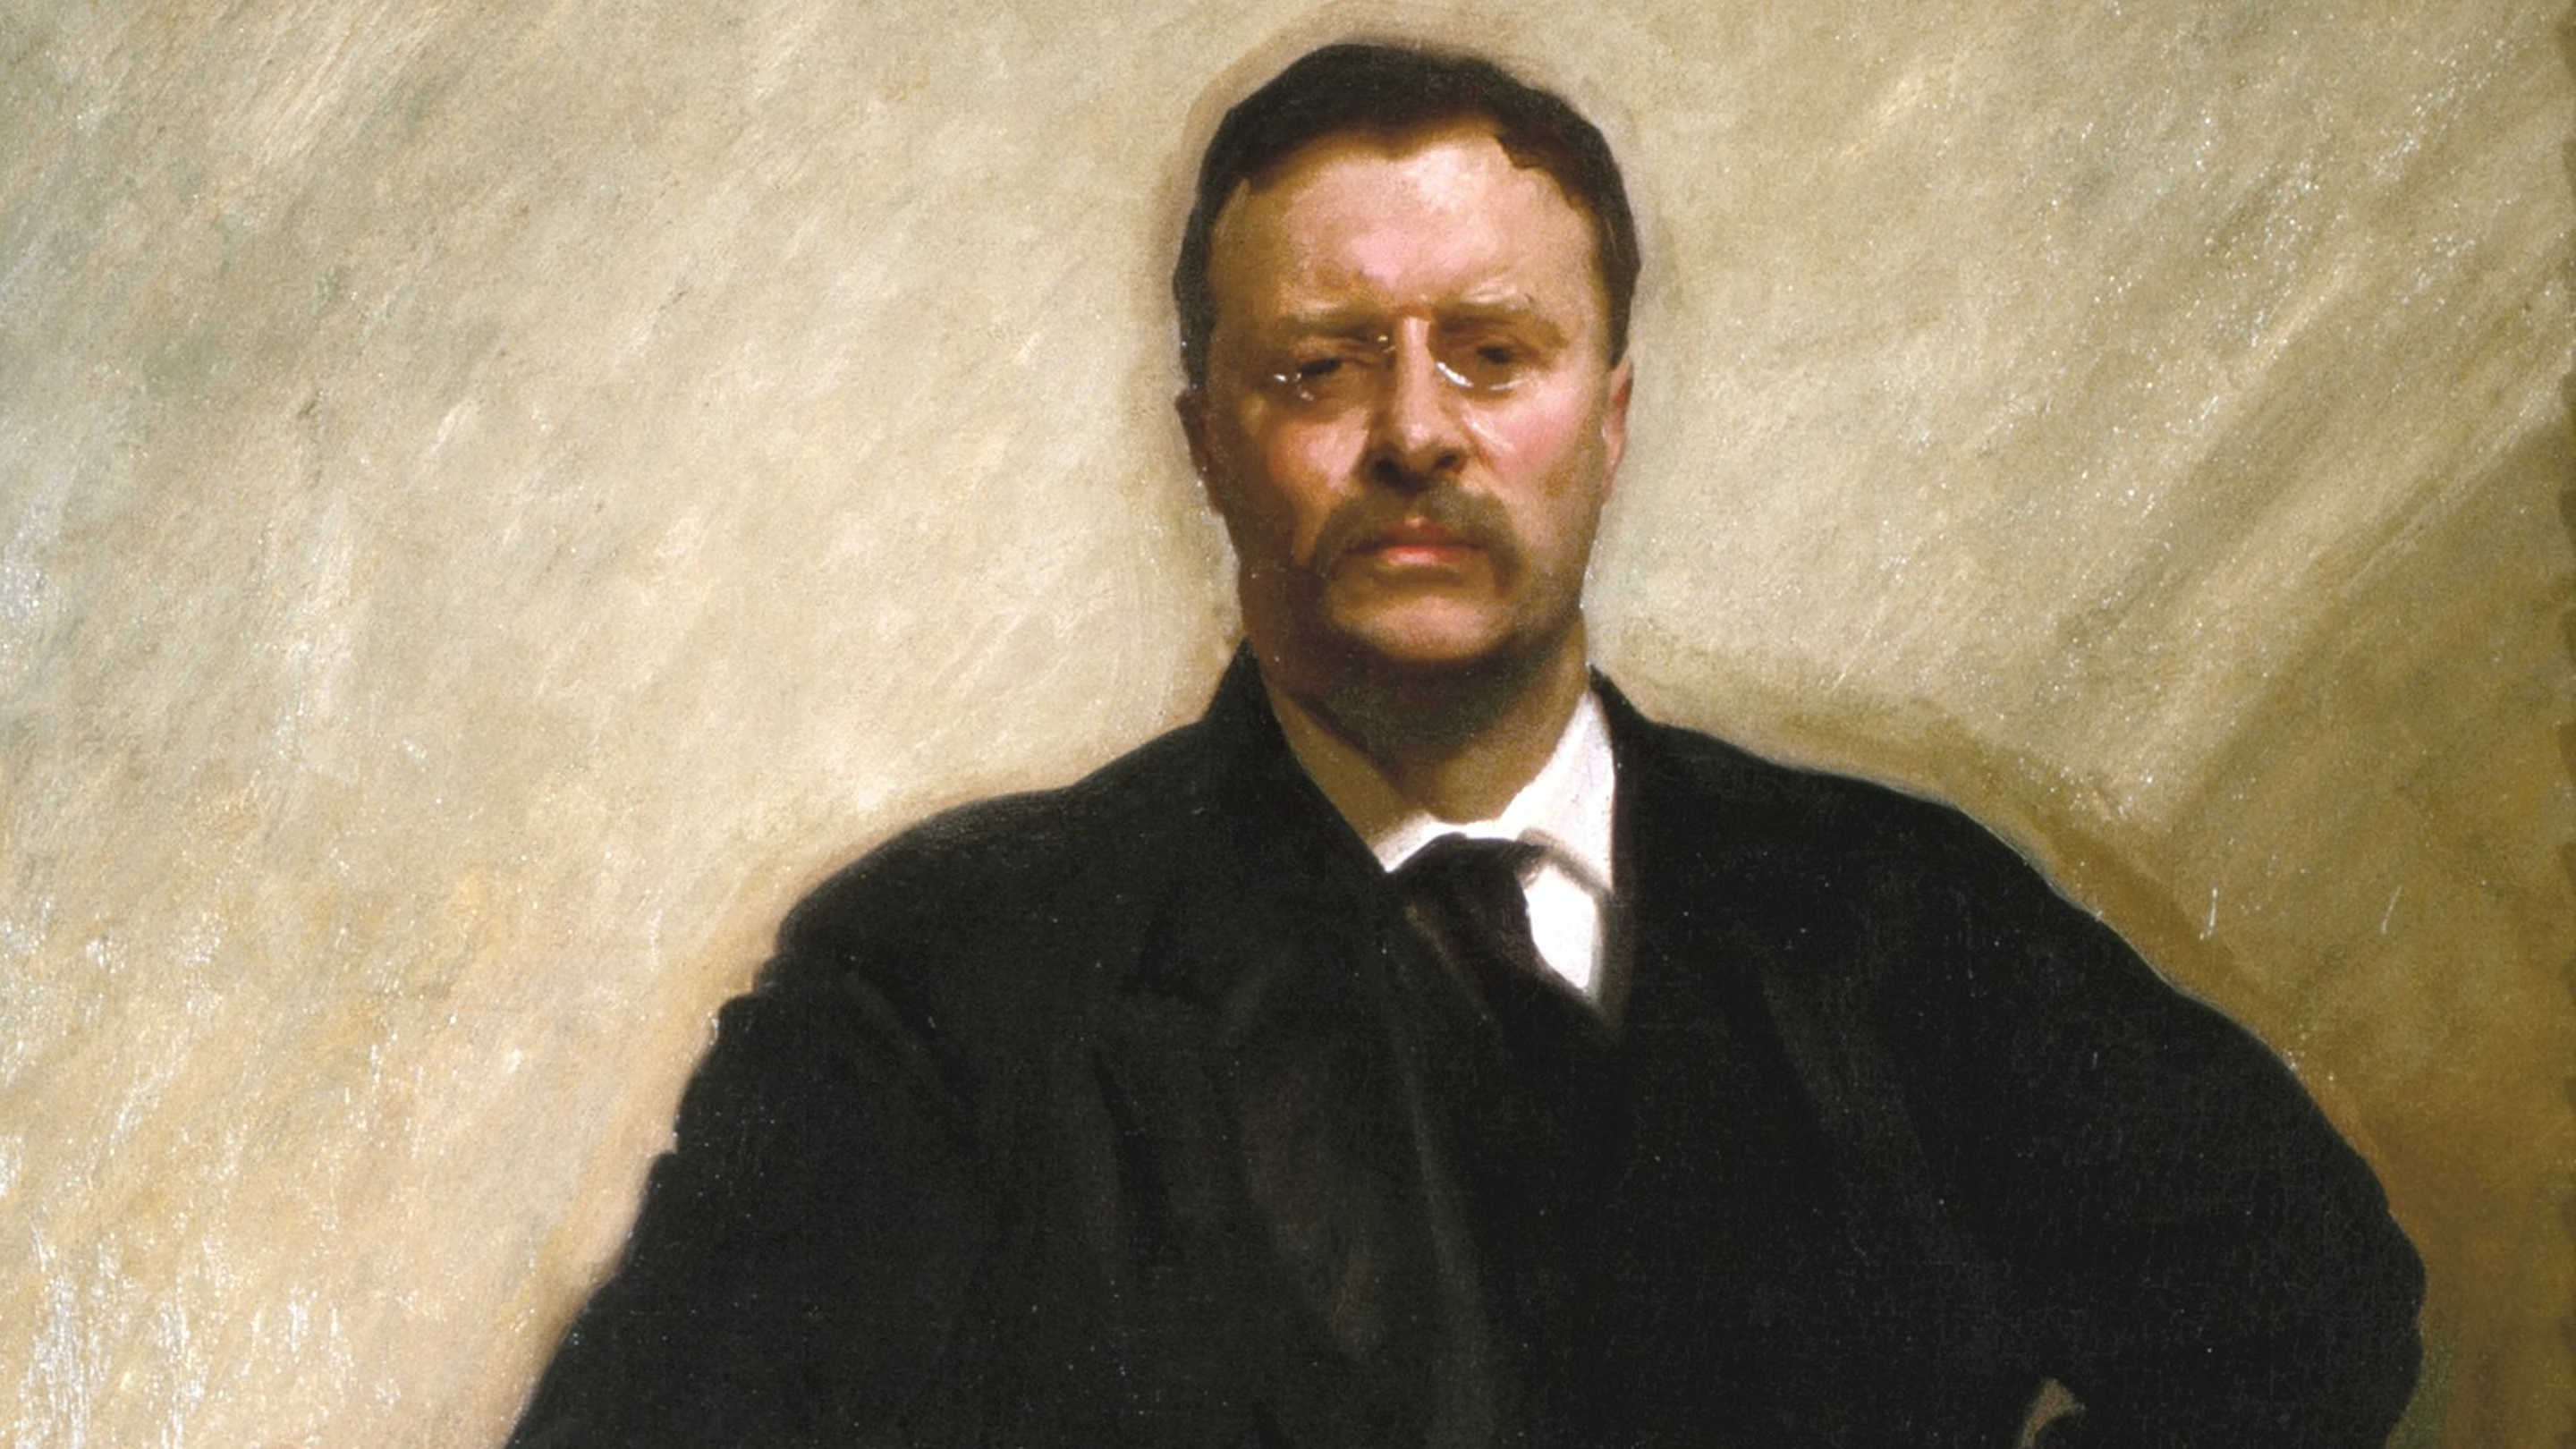 Roosevelt's "The Man in the Arena"